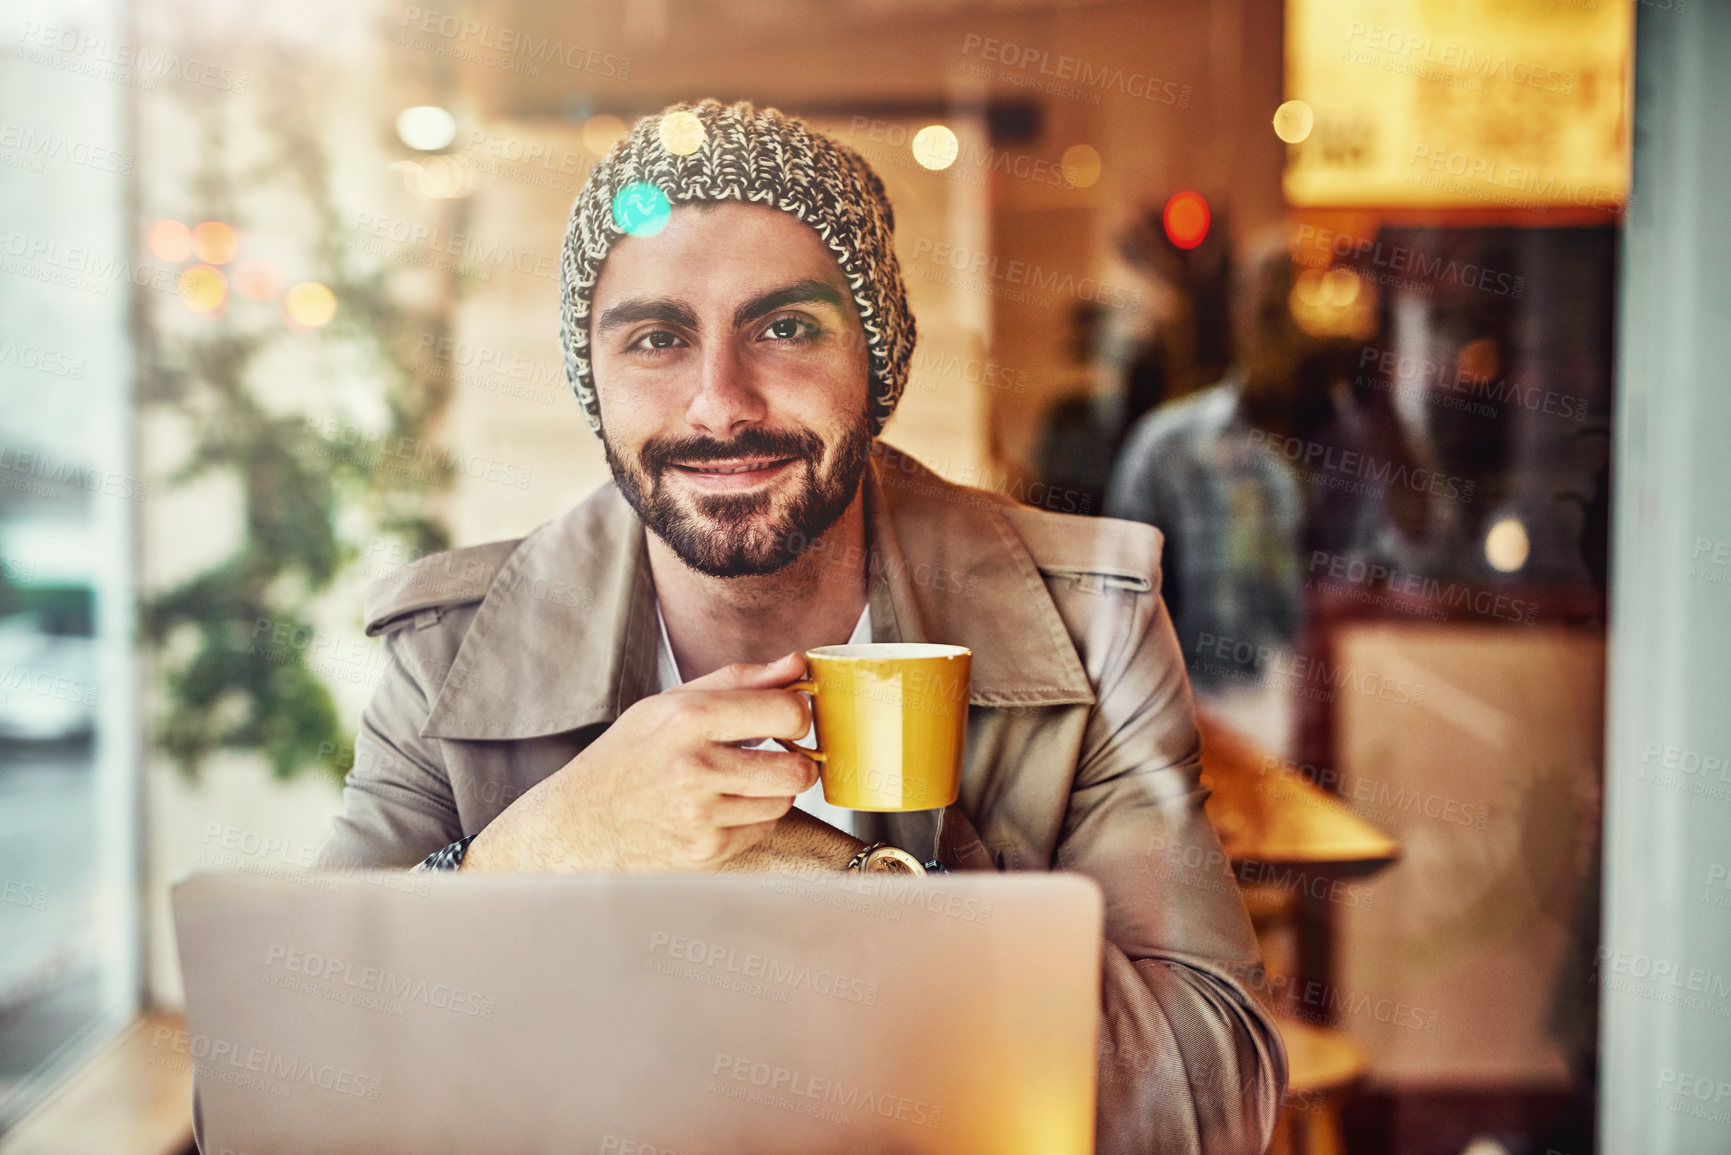 Buy stock photo Portrait of a stylish young man smiling while drinking a coffee and using a laptop in a cafe